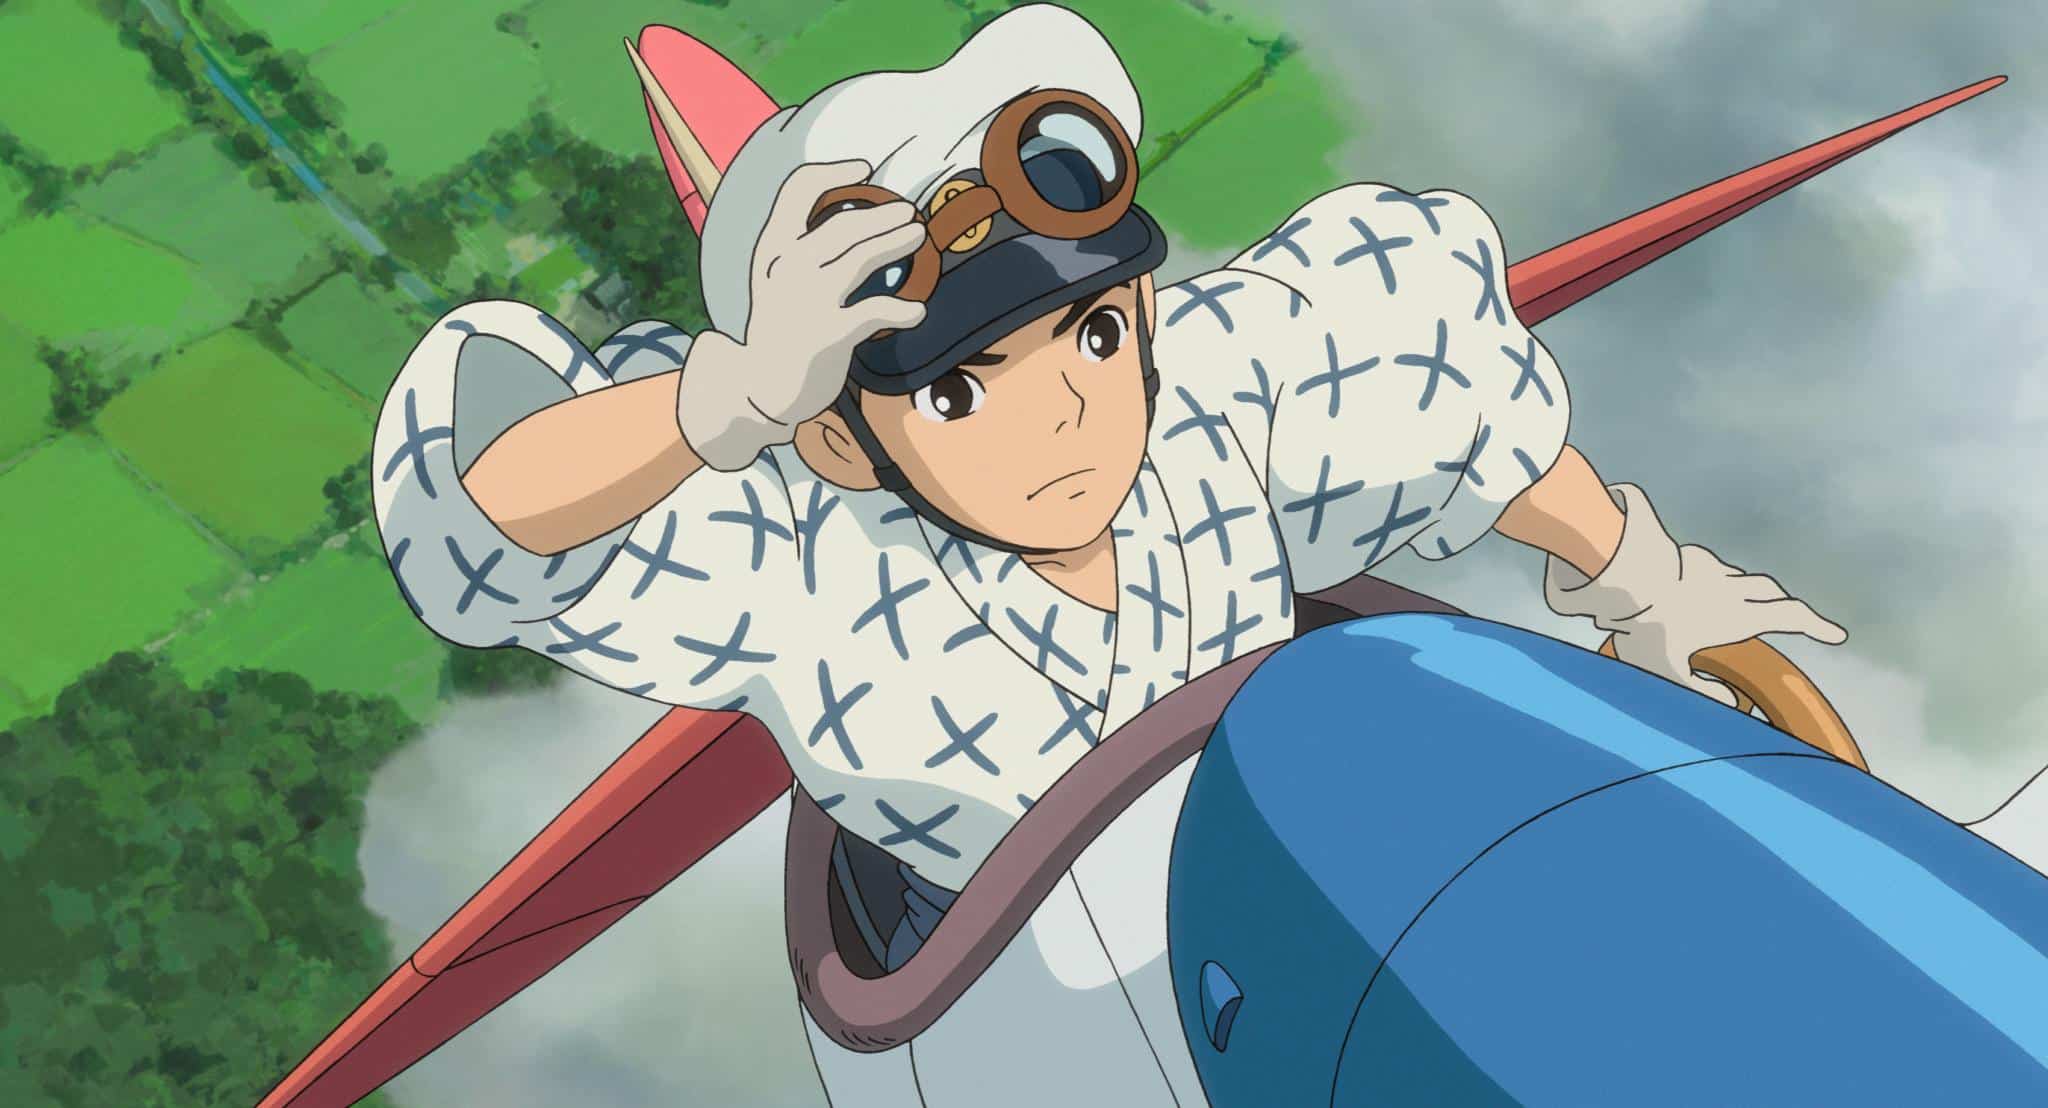 An animated boy in an airplane in this image from Studio Ghibli.